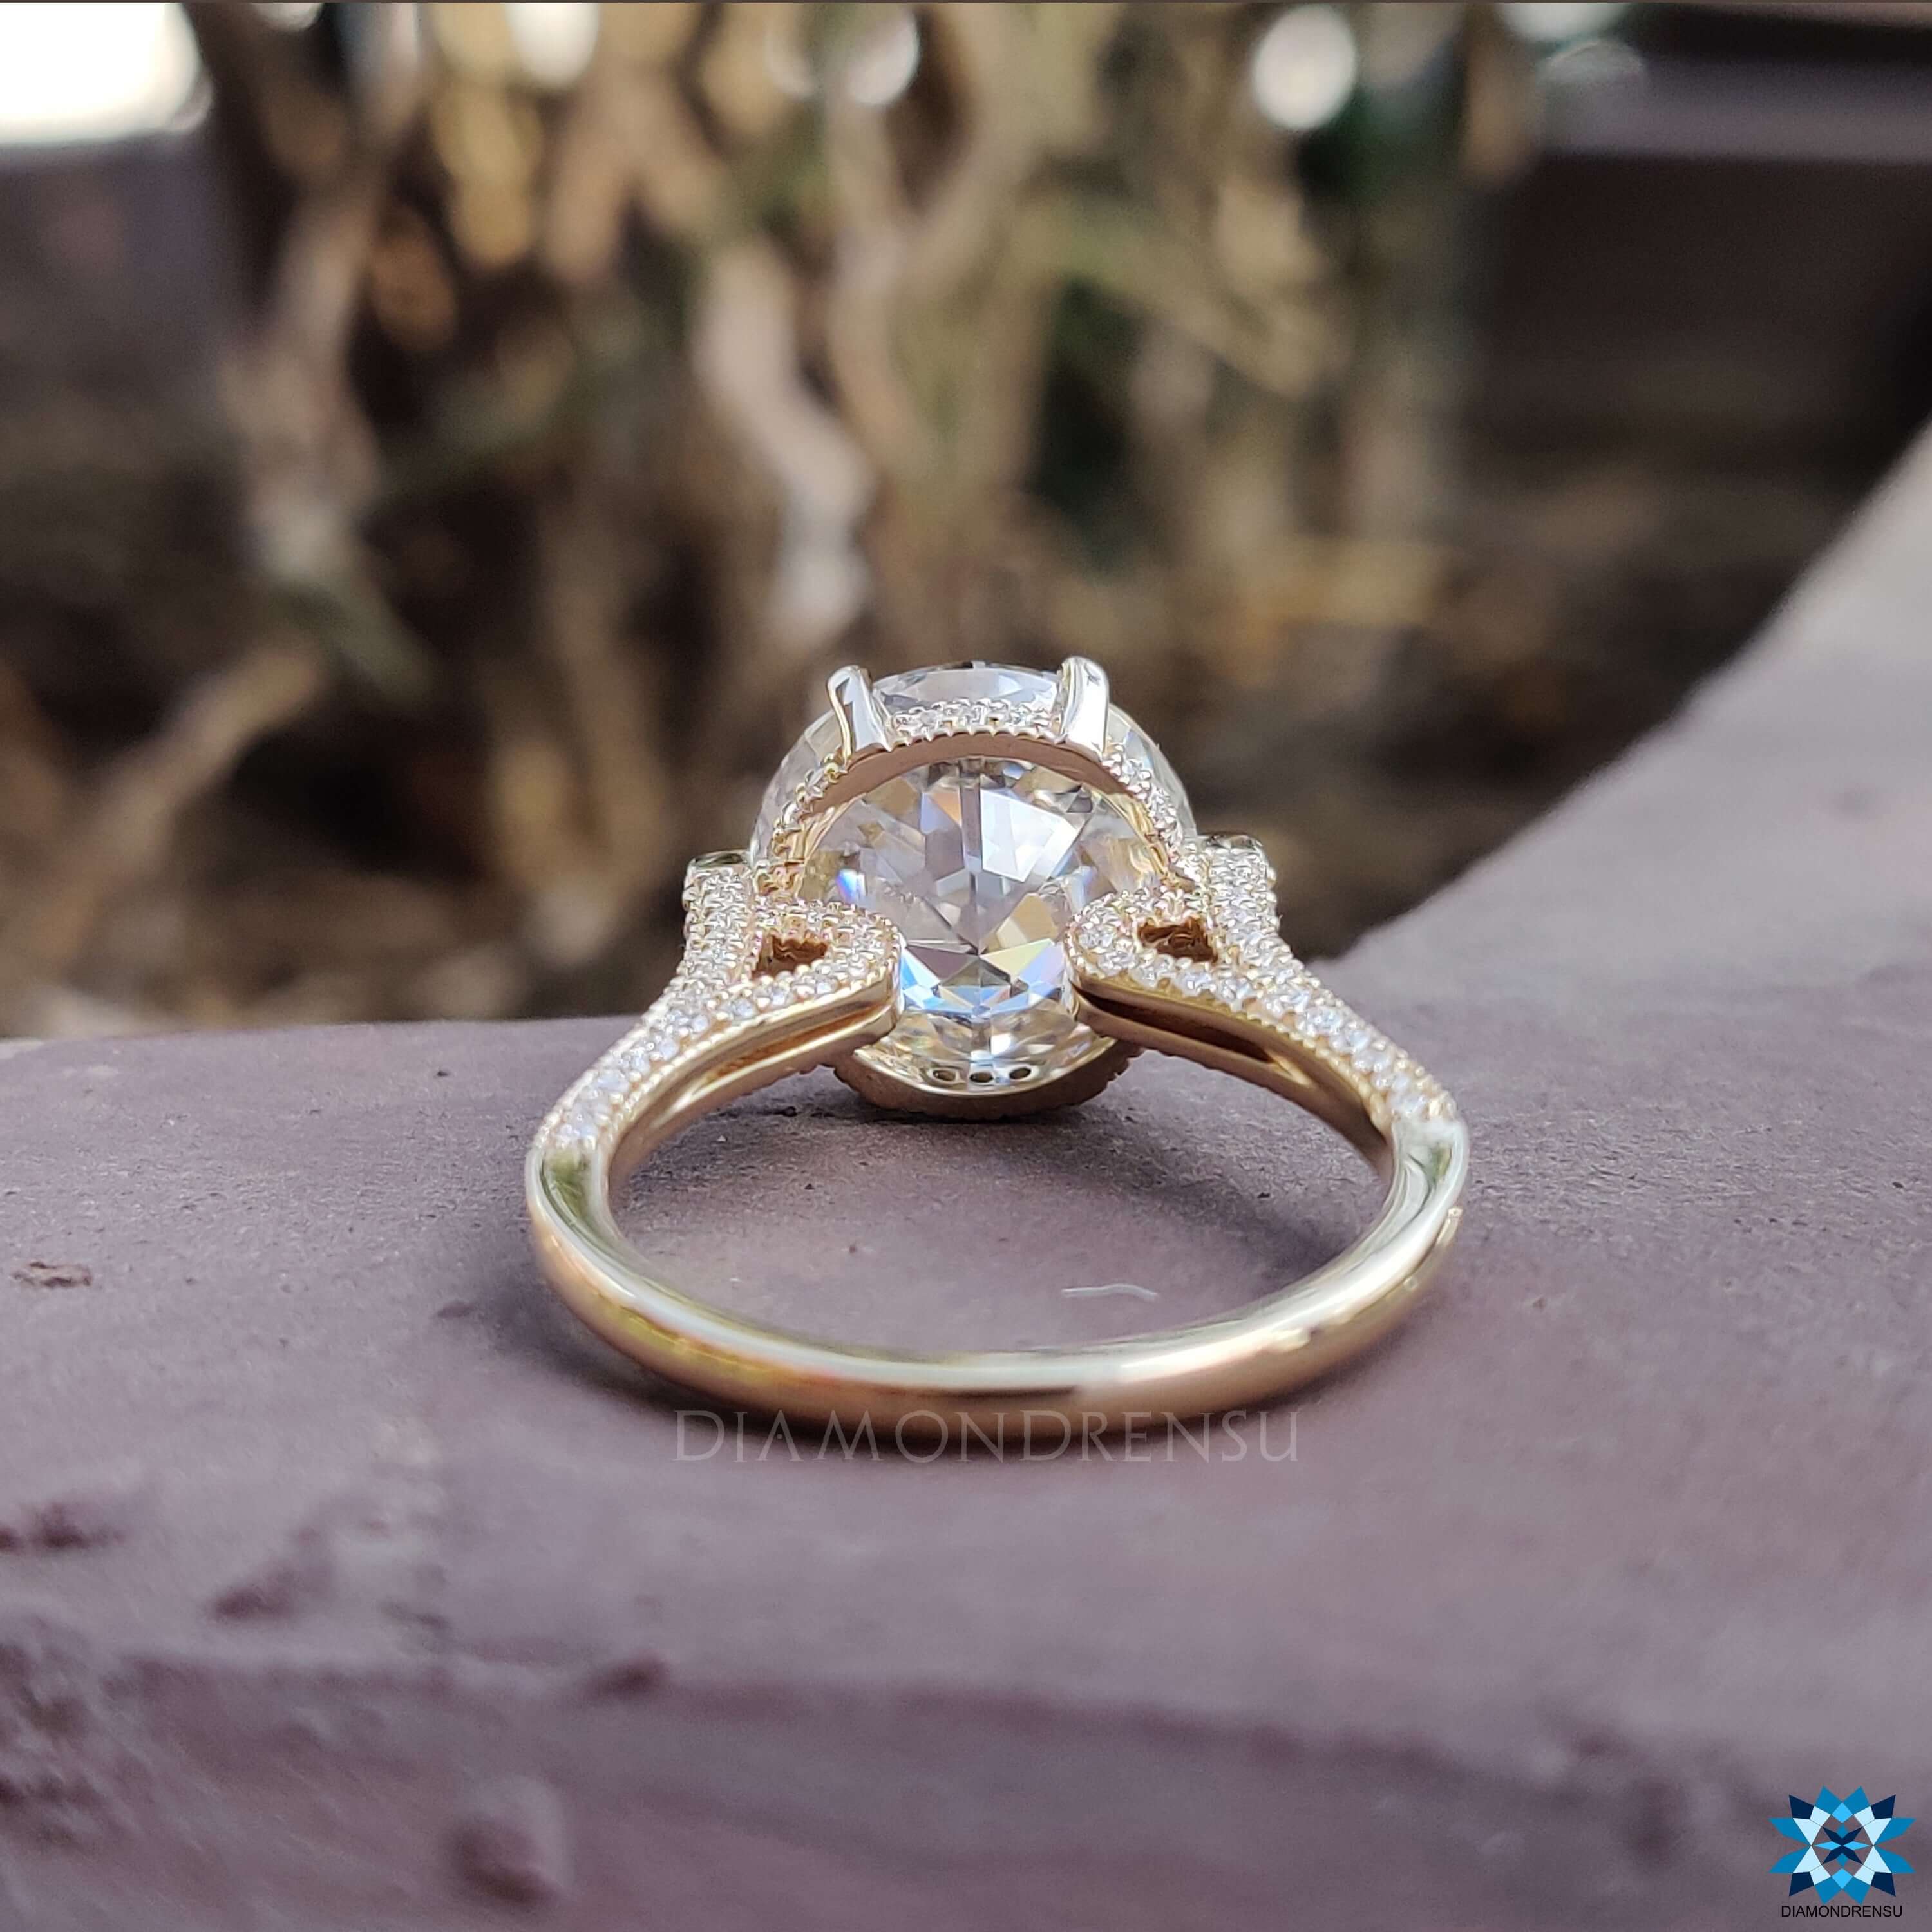 The beauty of a custom made engagement ring 💍 First we find the perfect  diamond, then we design the setting to be its perfect match. N... |  Instagram